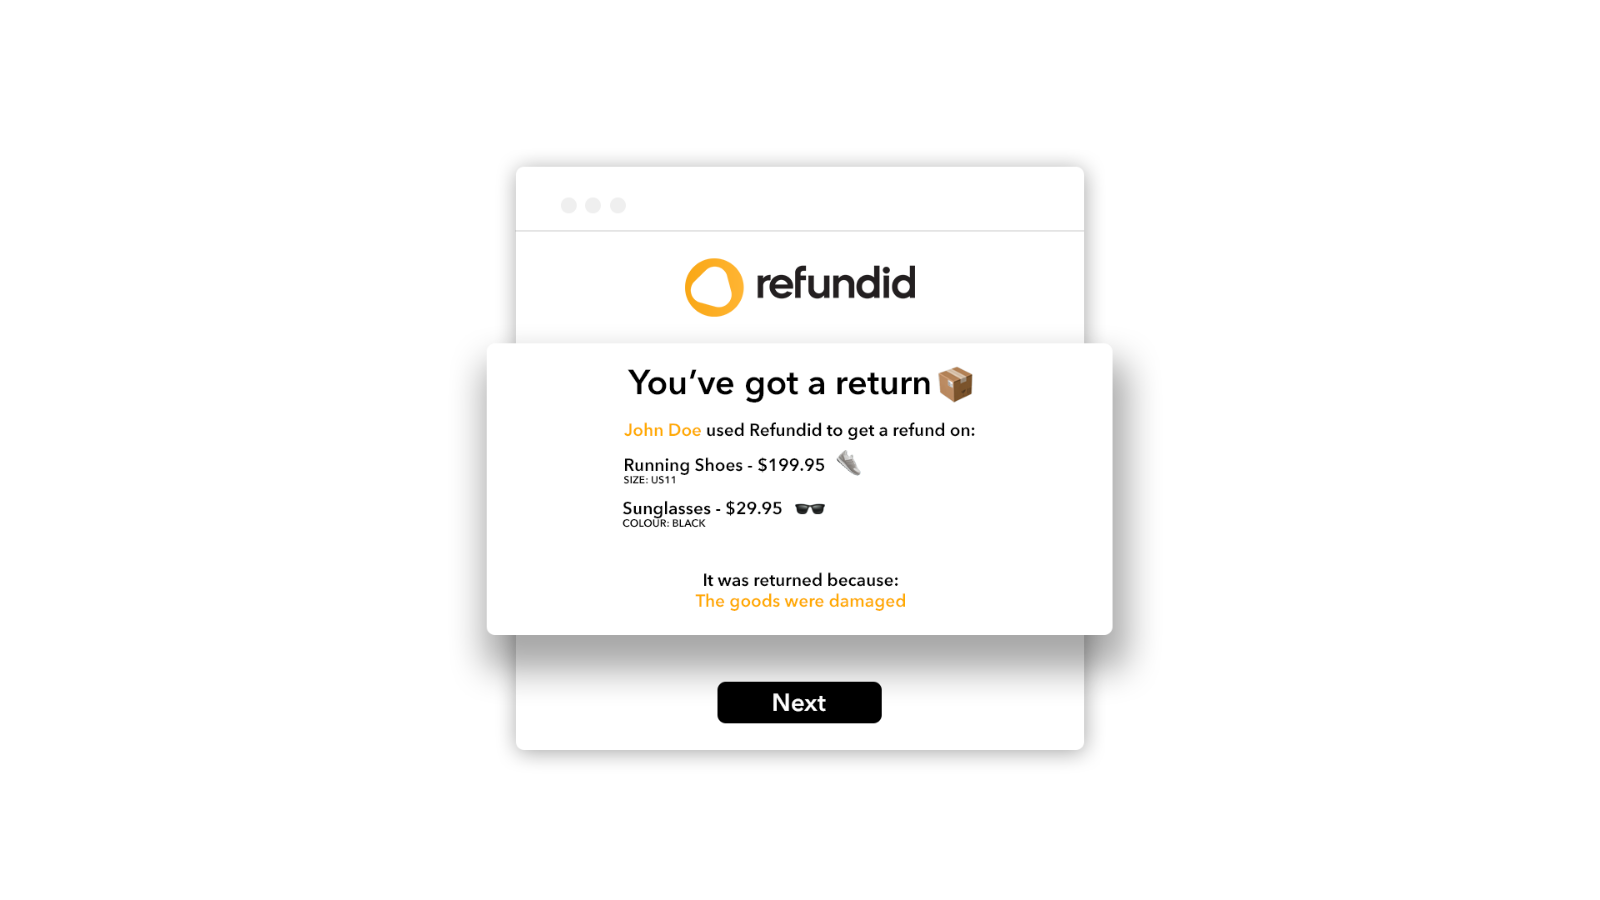 Easily view all incoming returns made through Refundid